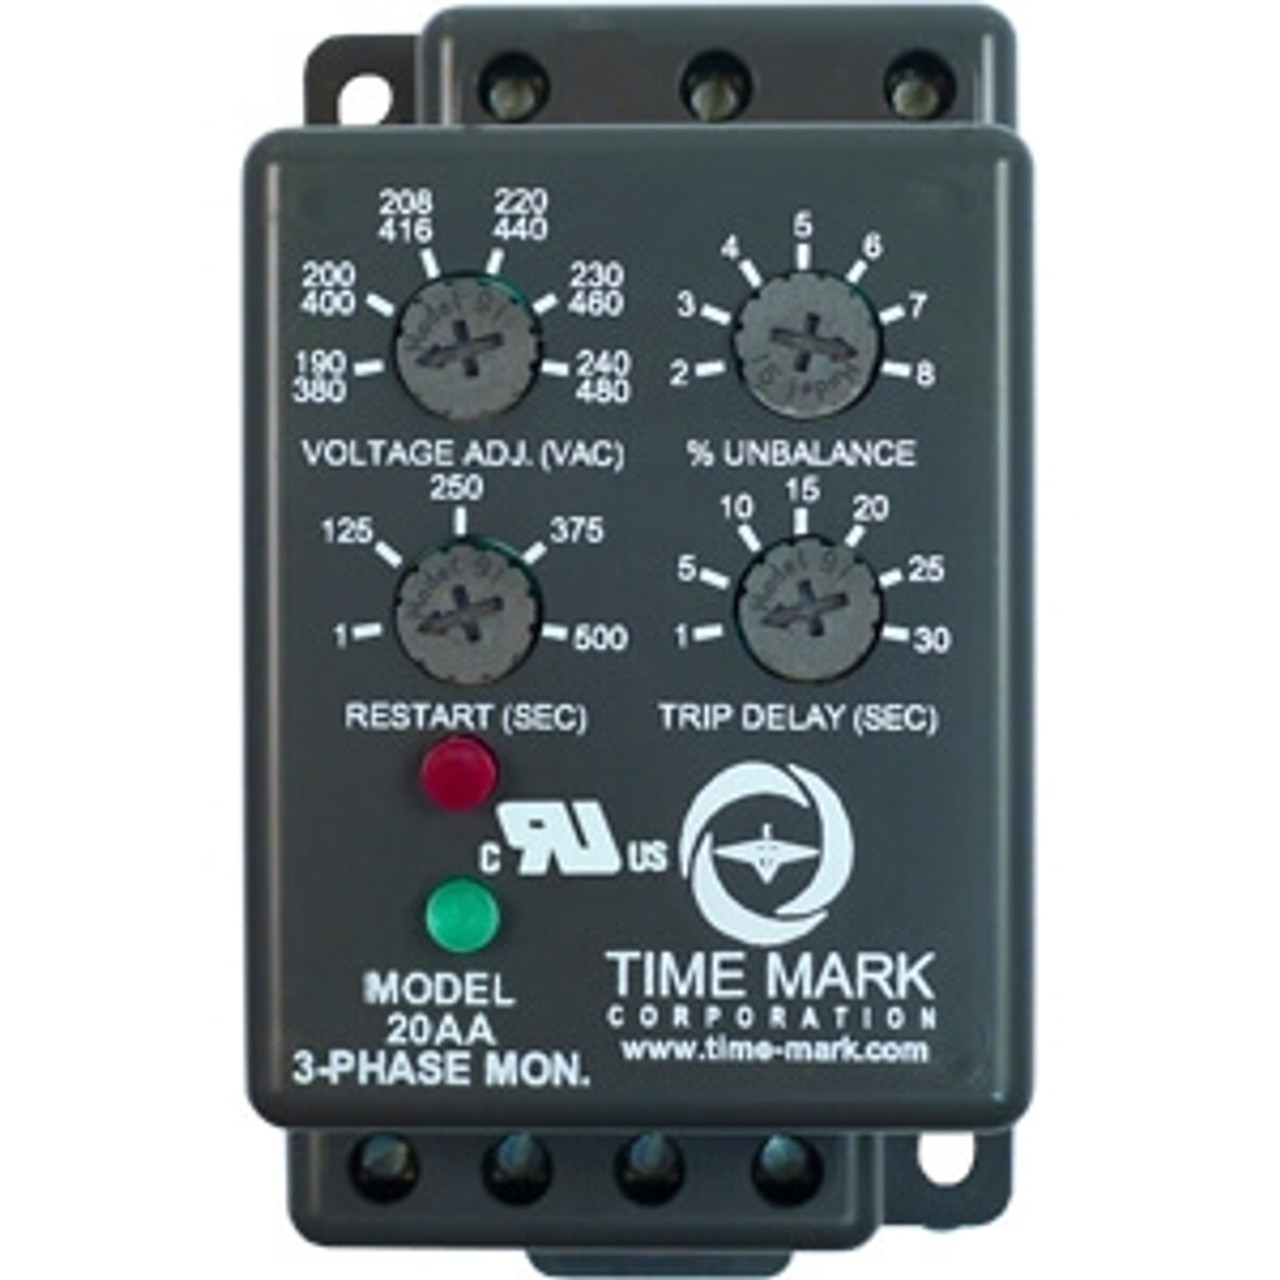 TimeMark 20AA-M Phase Monitor Relays